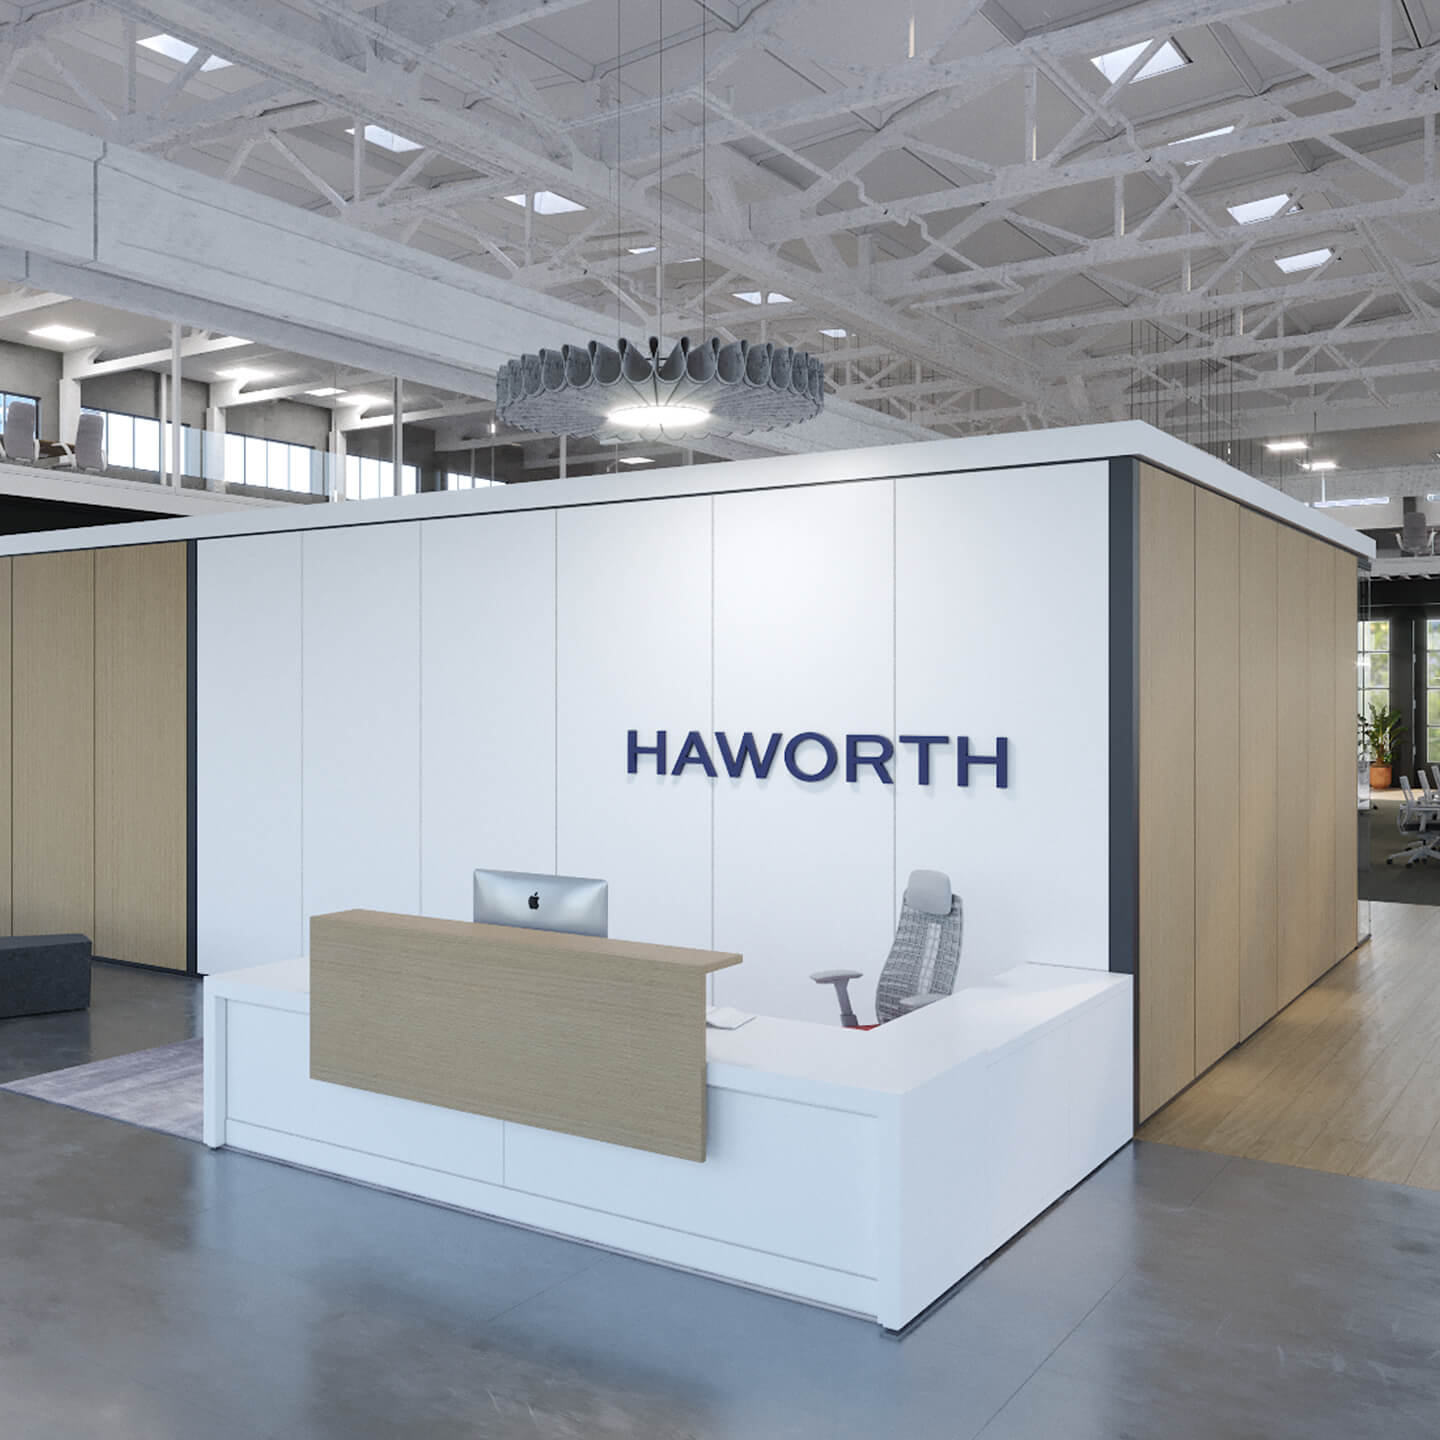 Haworth EZ Workspace partial divider in office lobby area with wood finish and fern chair 